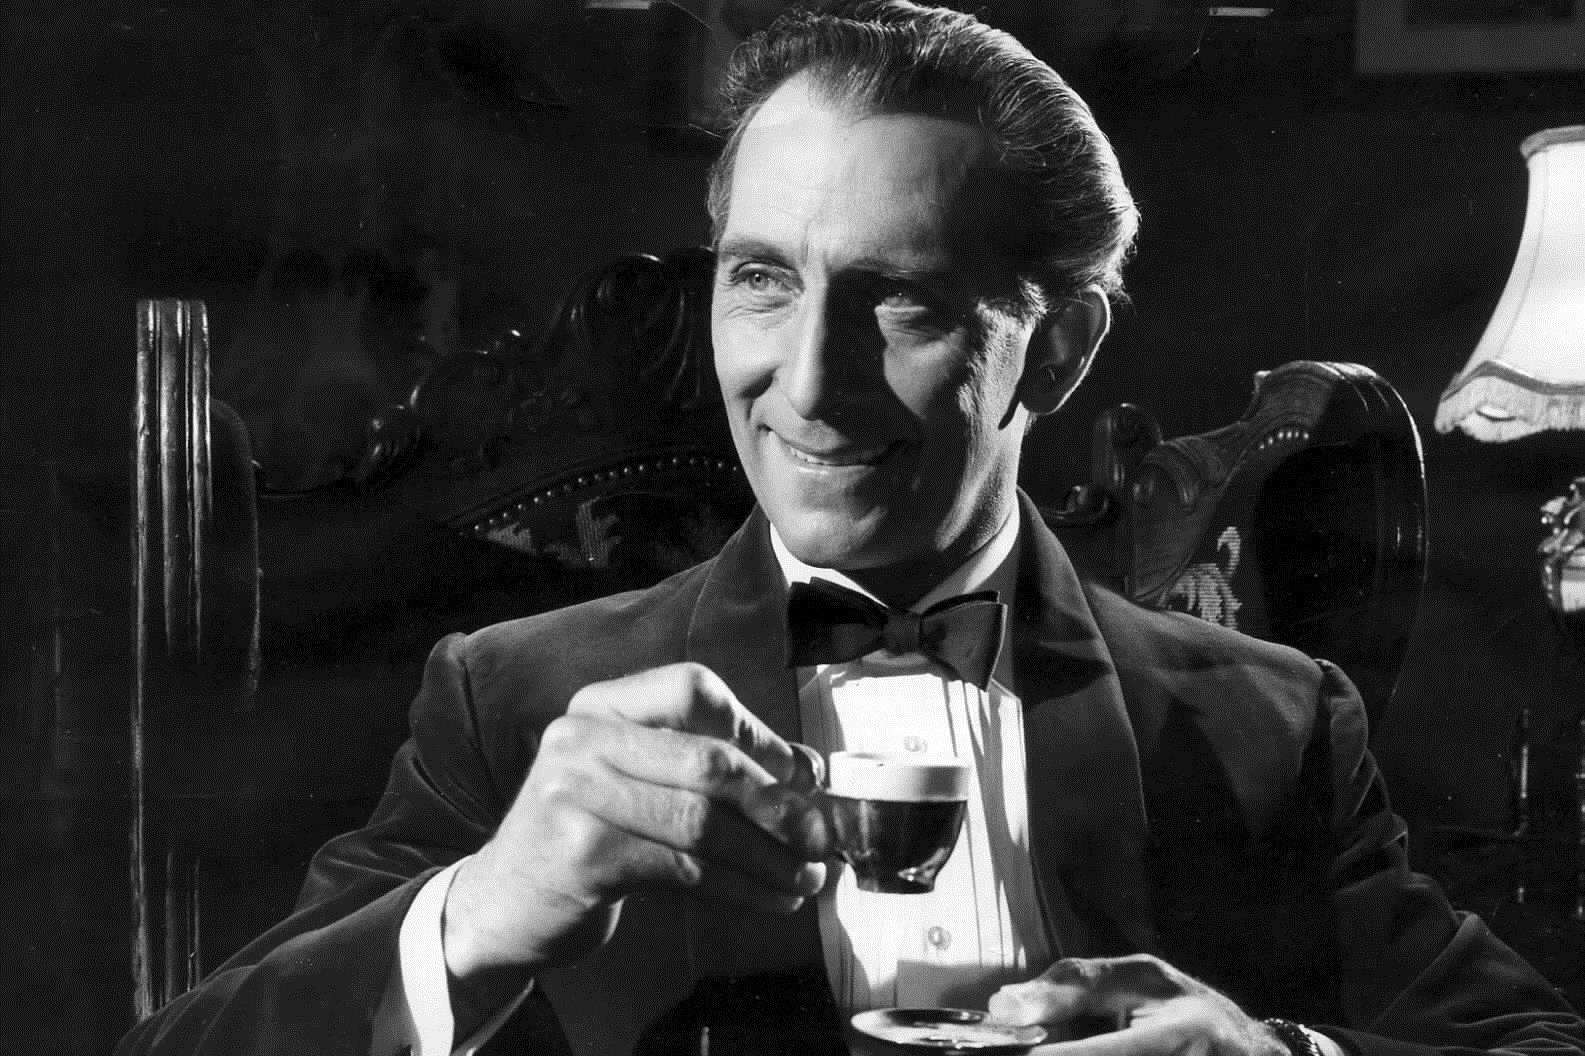 Peter Cushing lived in Whitstable for 25 years